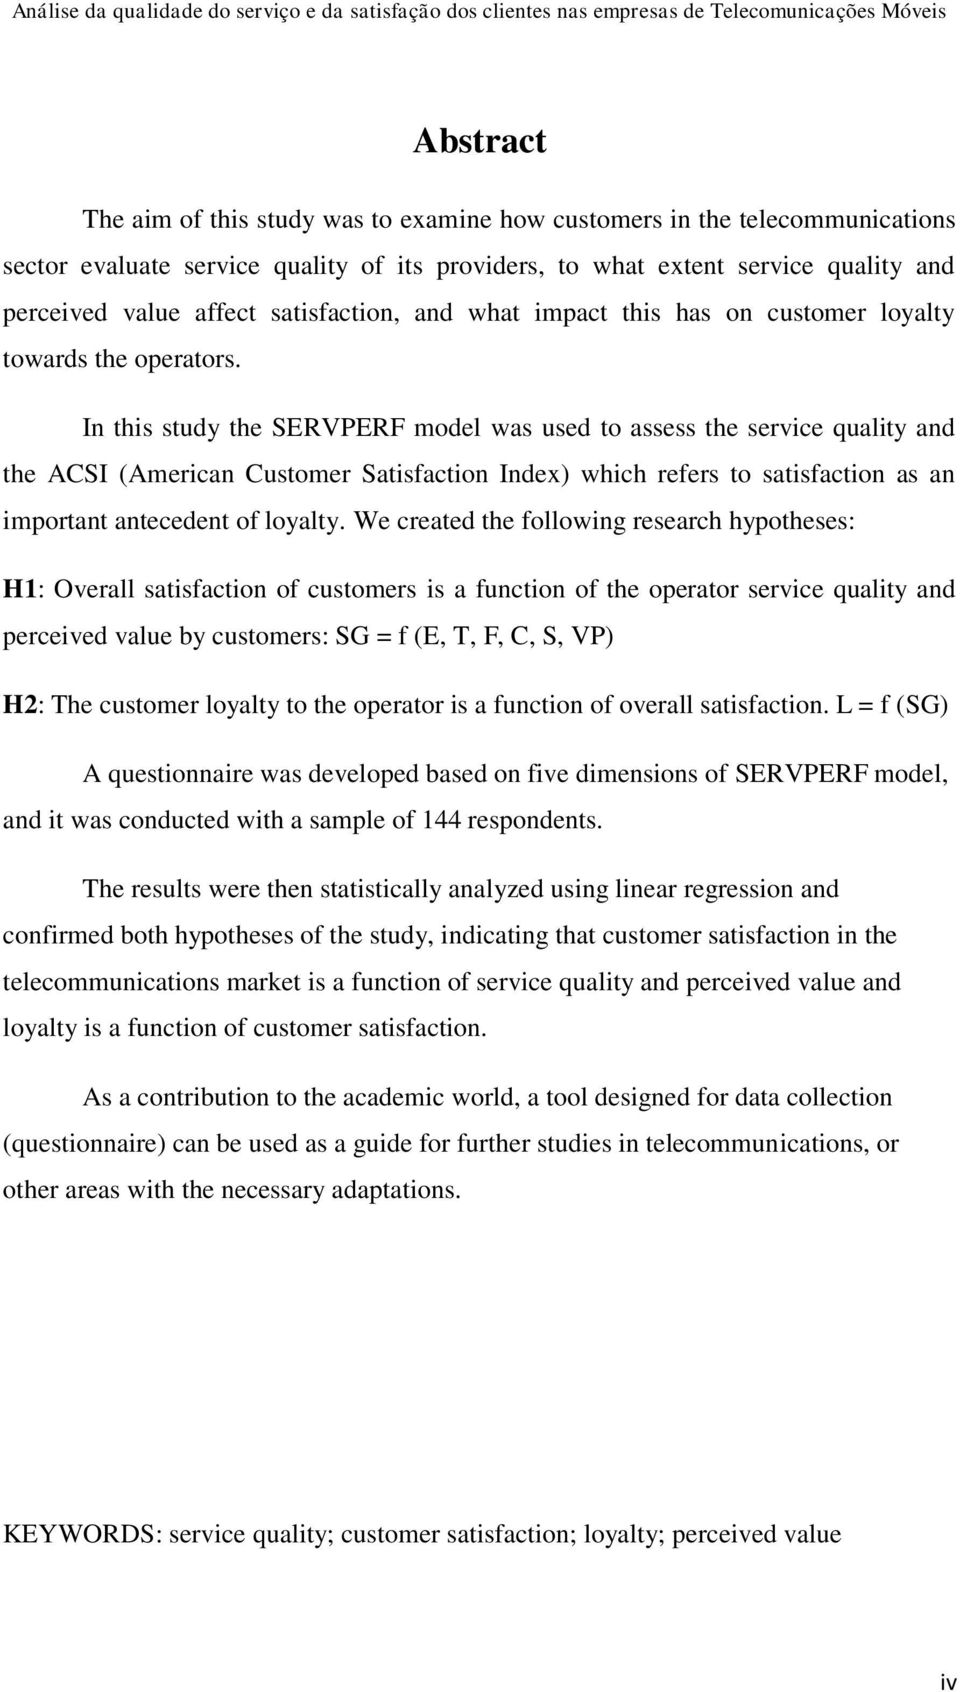 In this study the SERVPERF model was used to assess the service quality and the ACSI (American Customer Satisfaction Index) which refers to satisfaction as an important antecedent of loyalty.